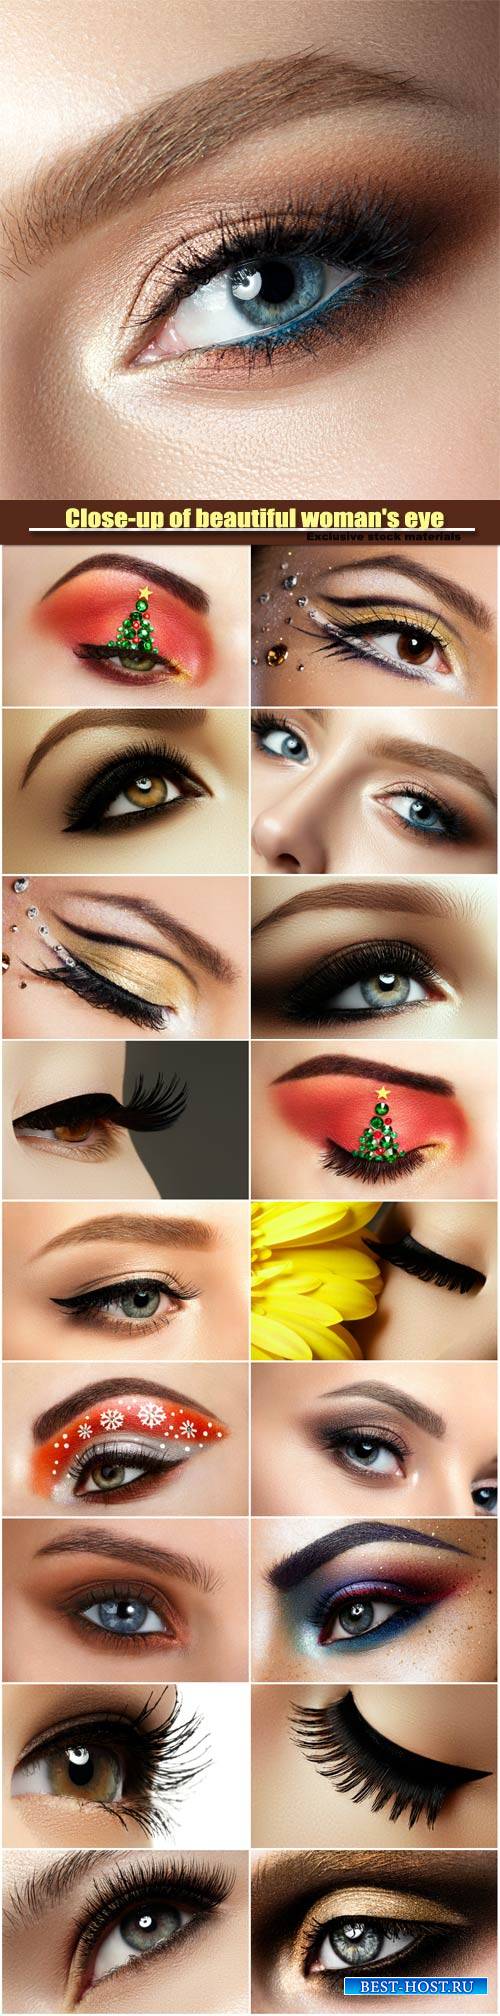 Close-up of beautiful woman's eye, colored eyeshadows, makeover christmas tree